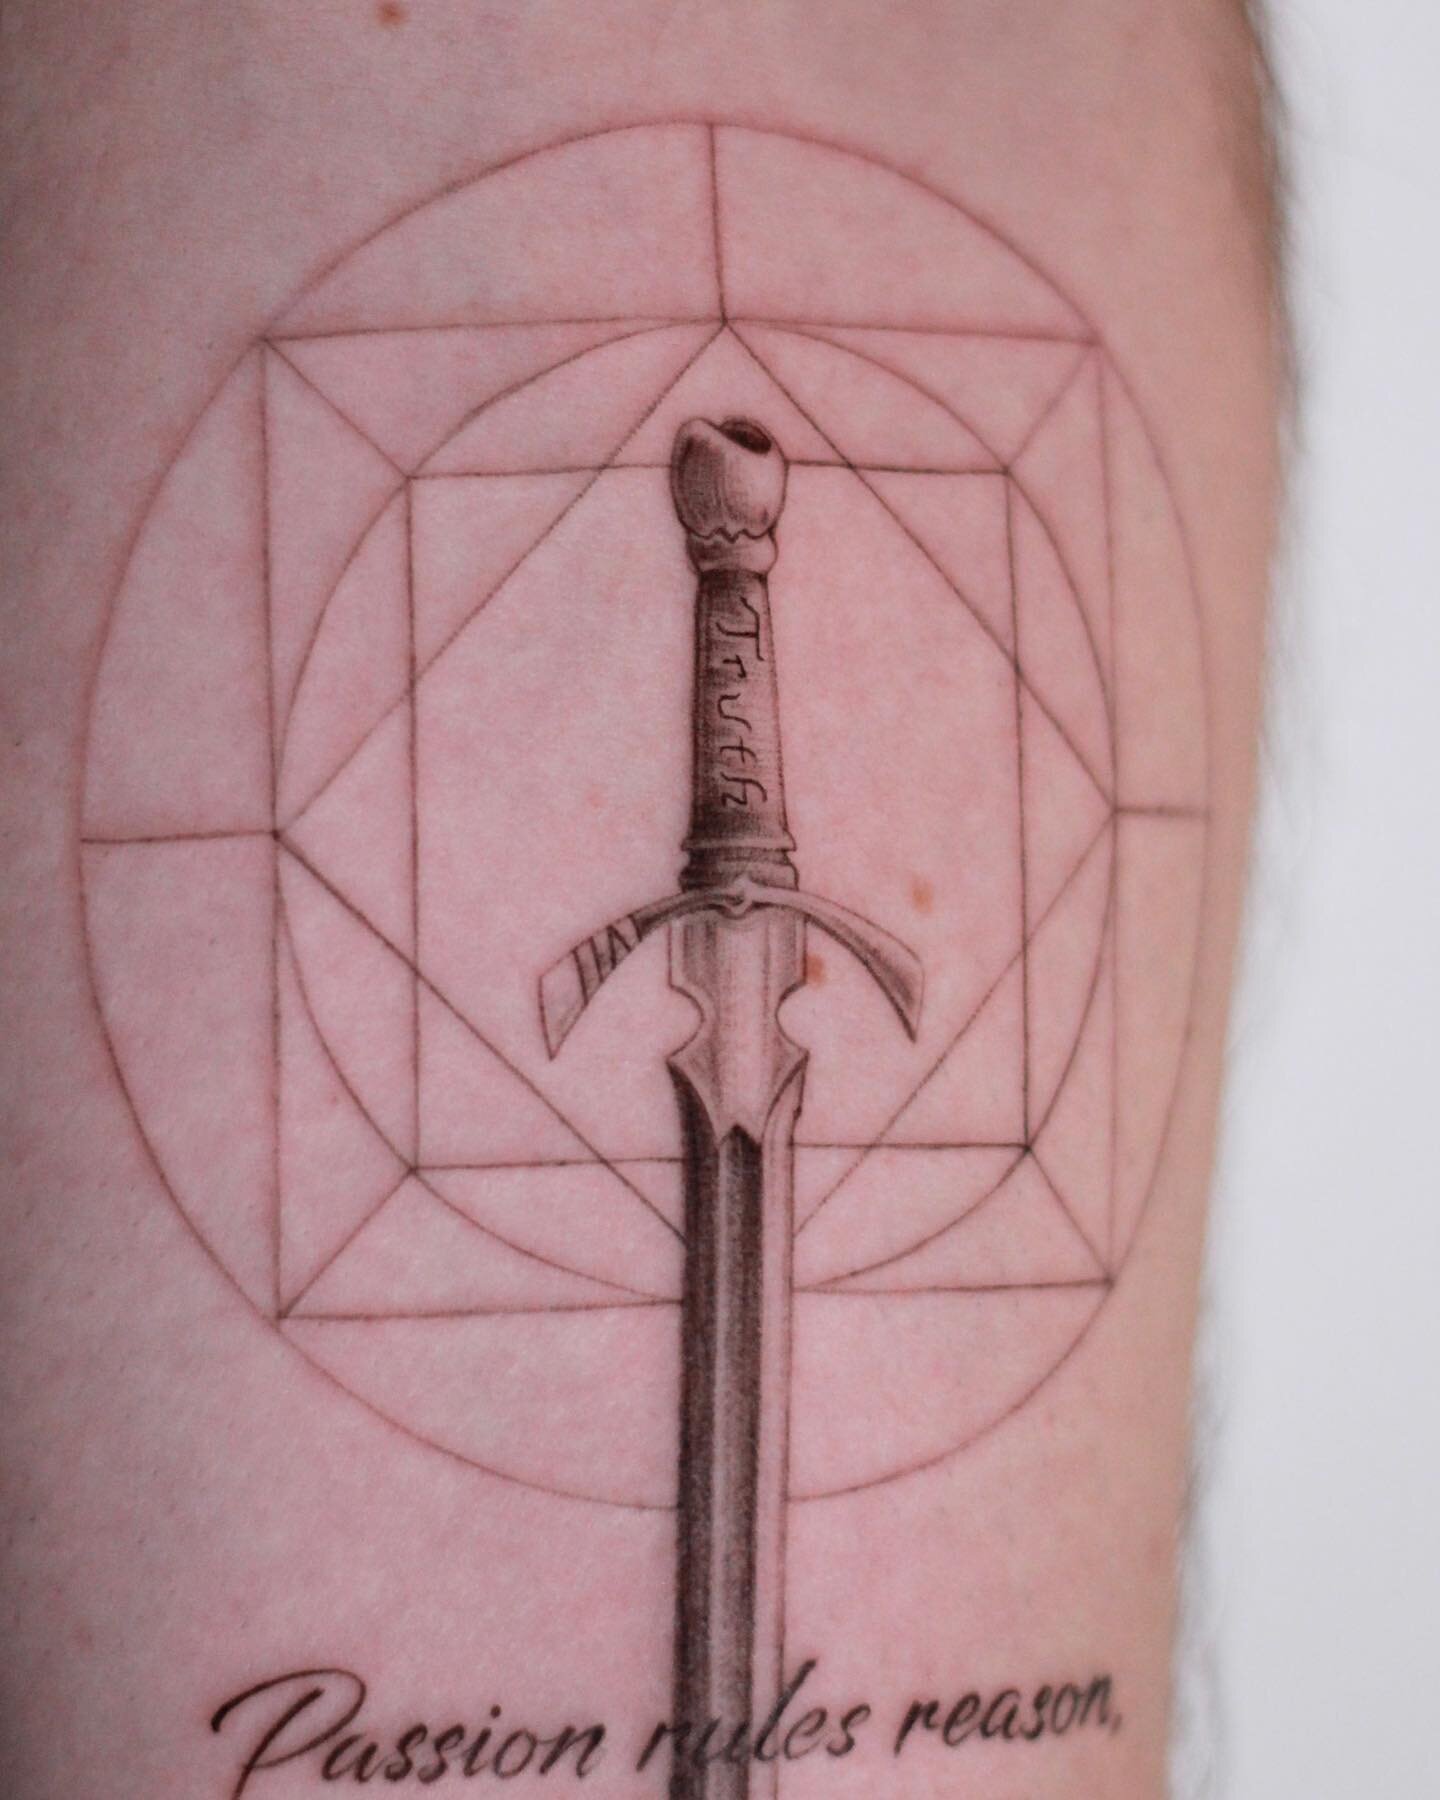 A sword from a cartoon he loves🗡️ His first tattoo ✨